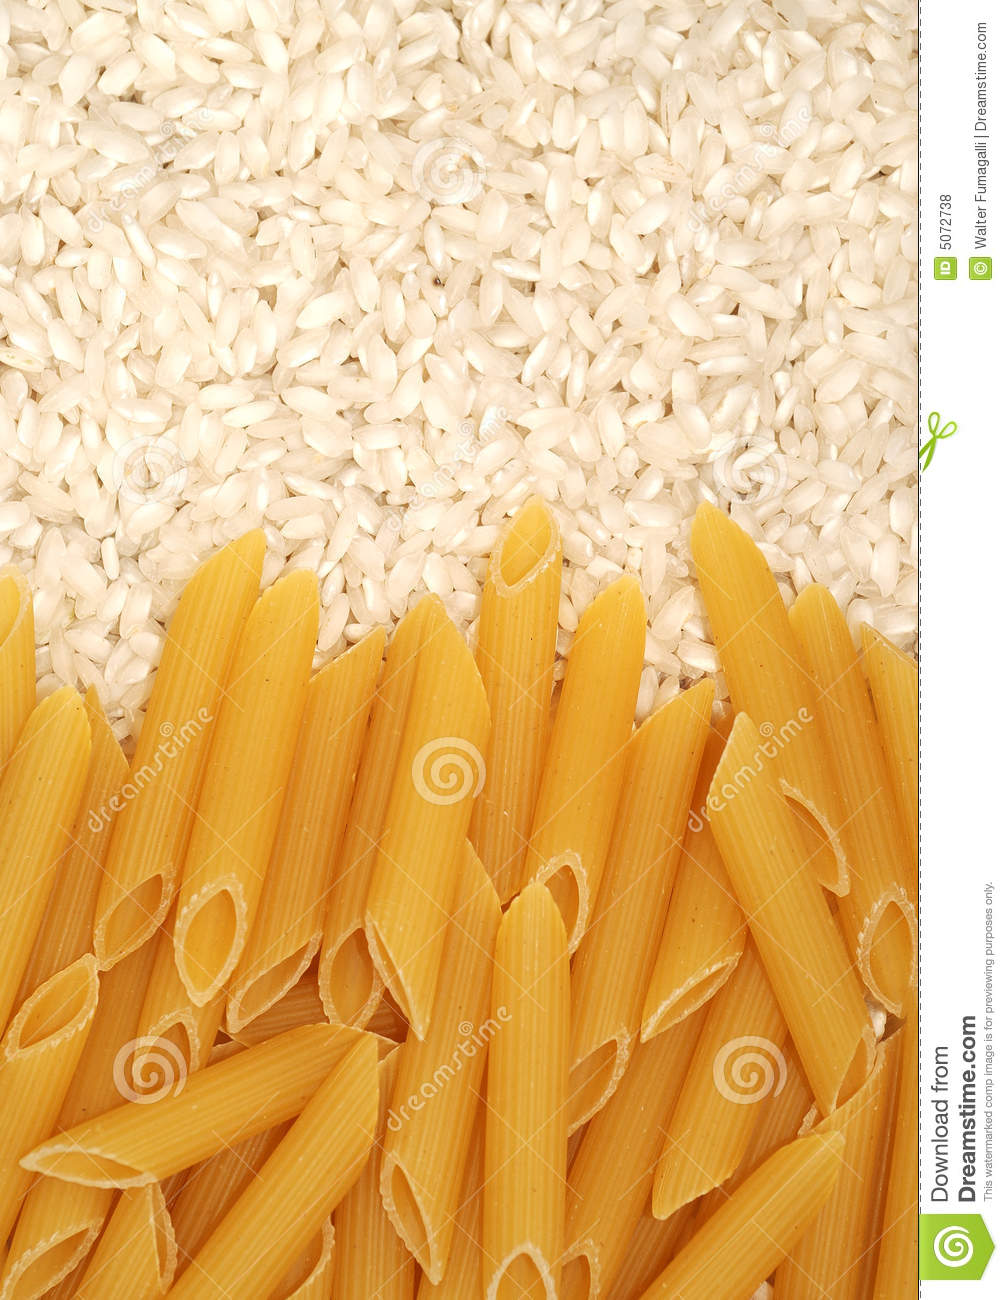 Pasta And Rice Grains Background Royalty Free Stock Photos   Image    